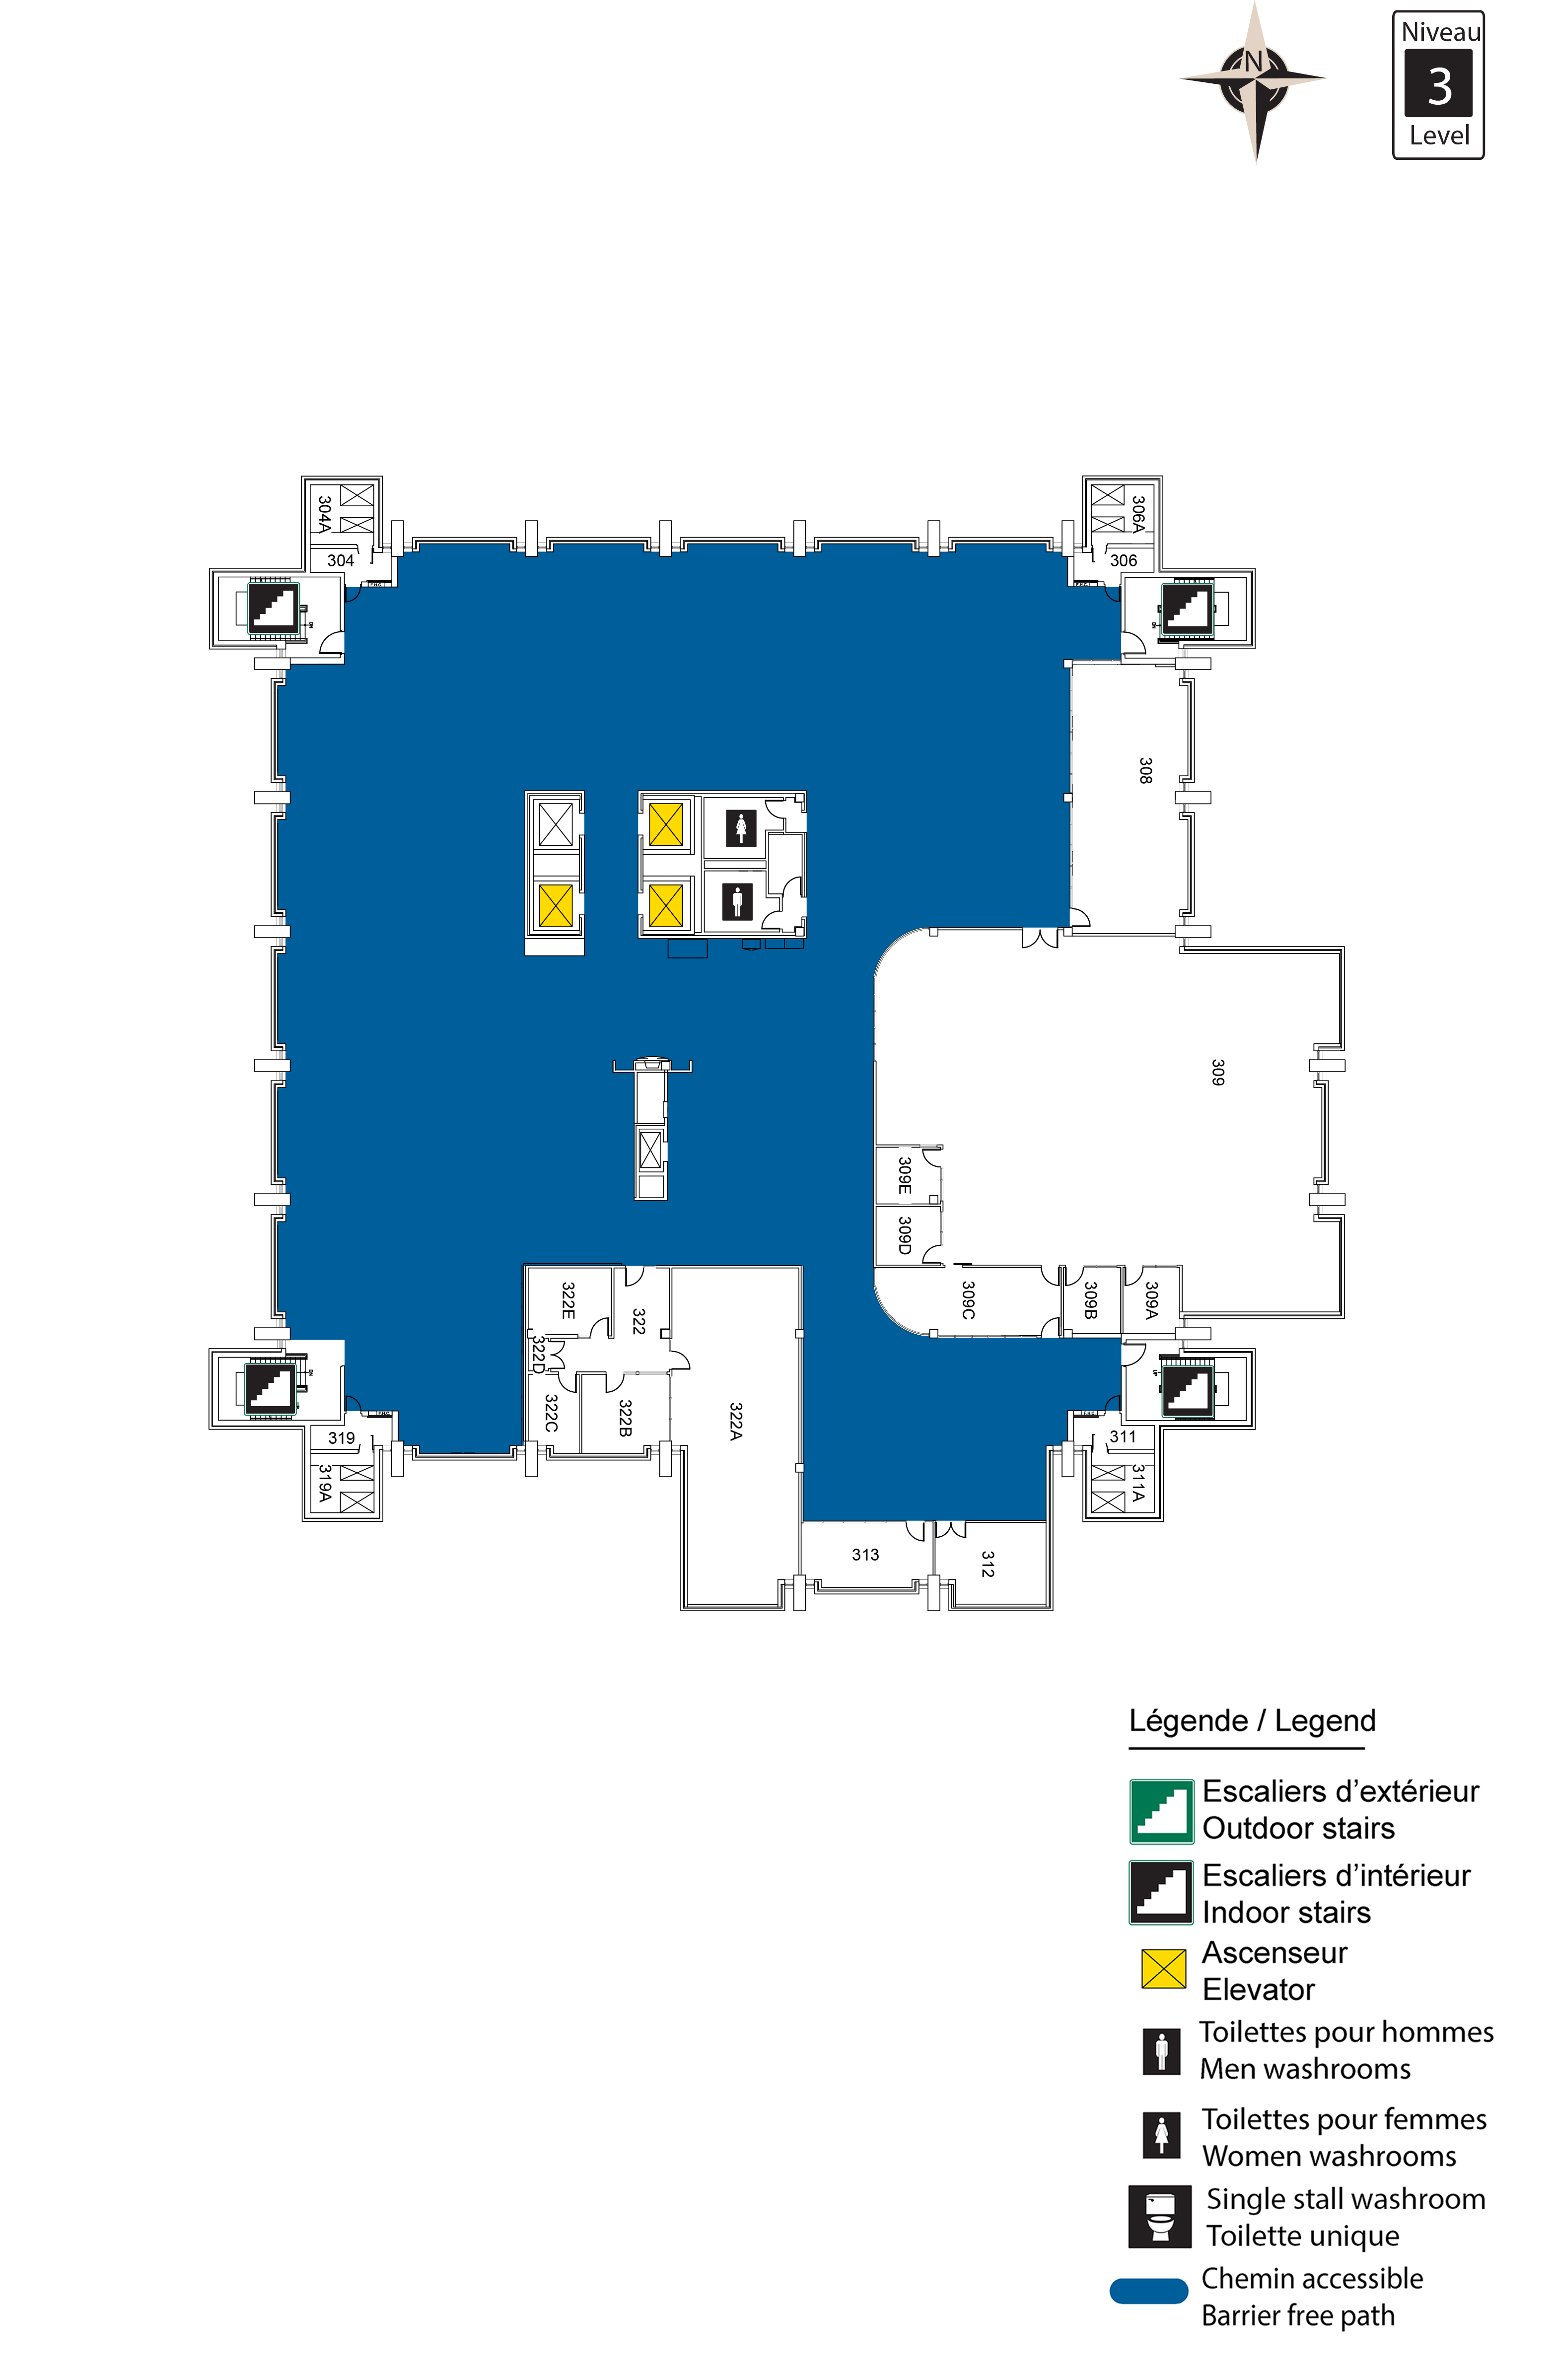 Accessible map of Morisset level 3